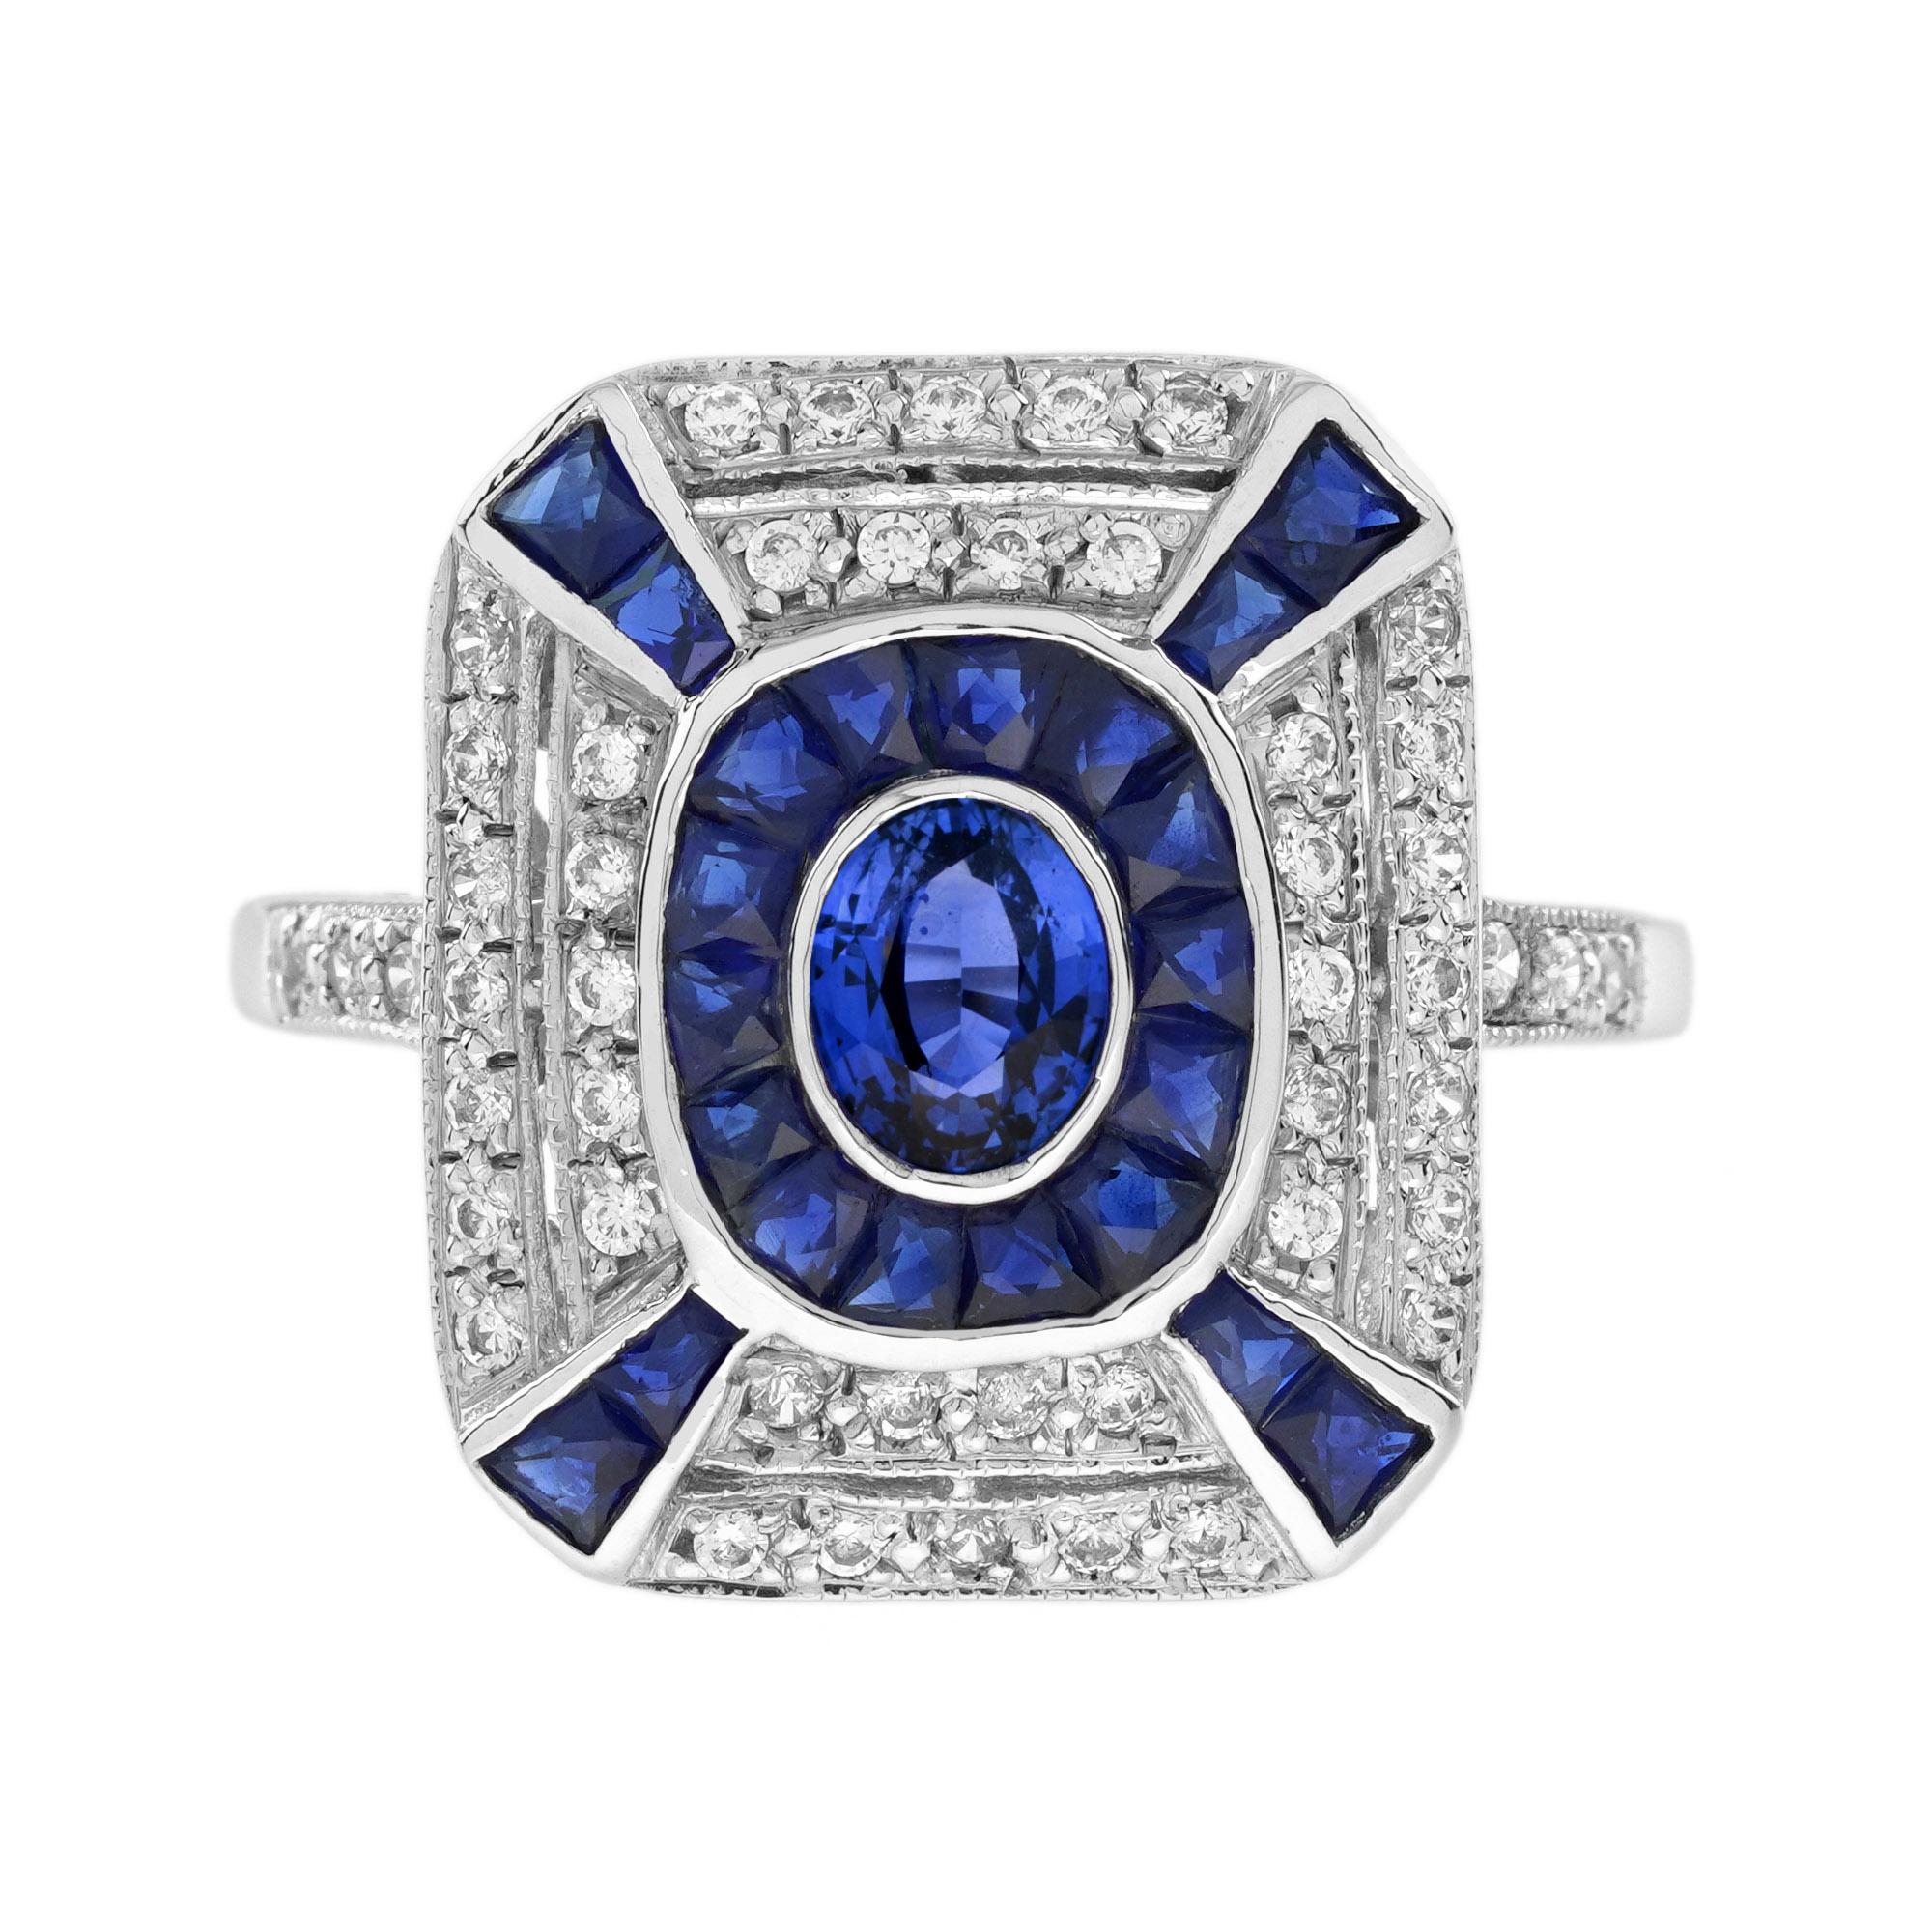 For Sale:  Ceylon Sapphire and Diamond Art Deco Style Halo Ring in 18K White Gold